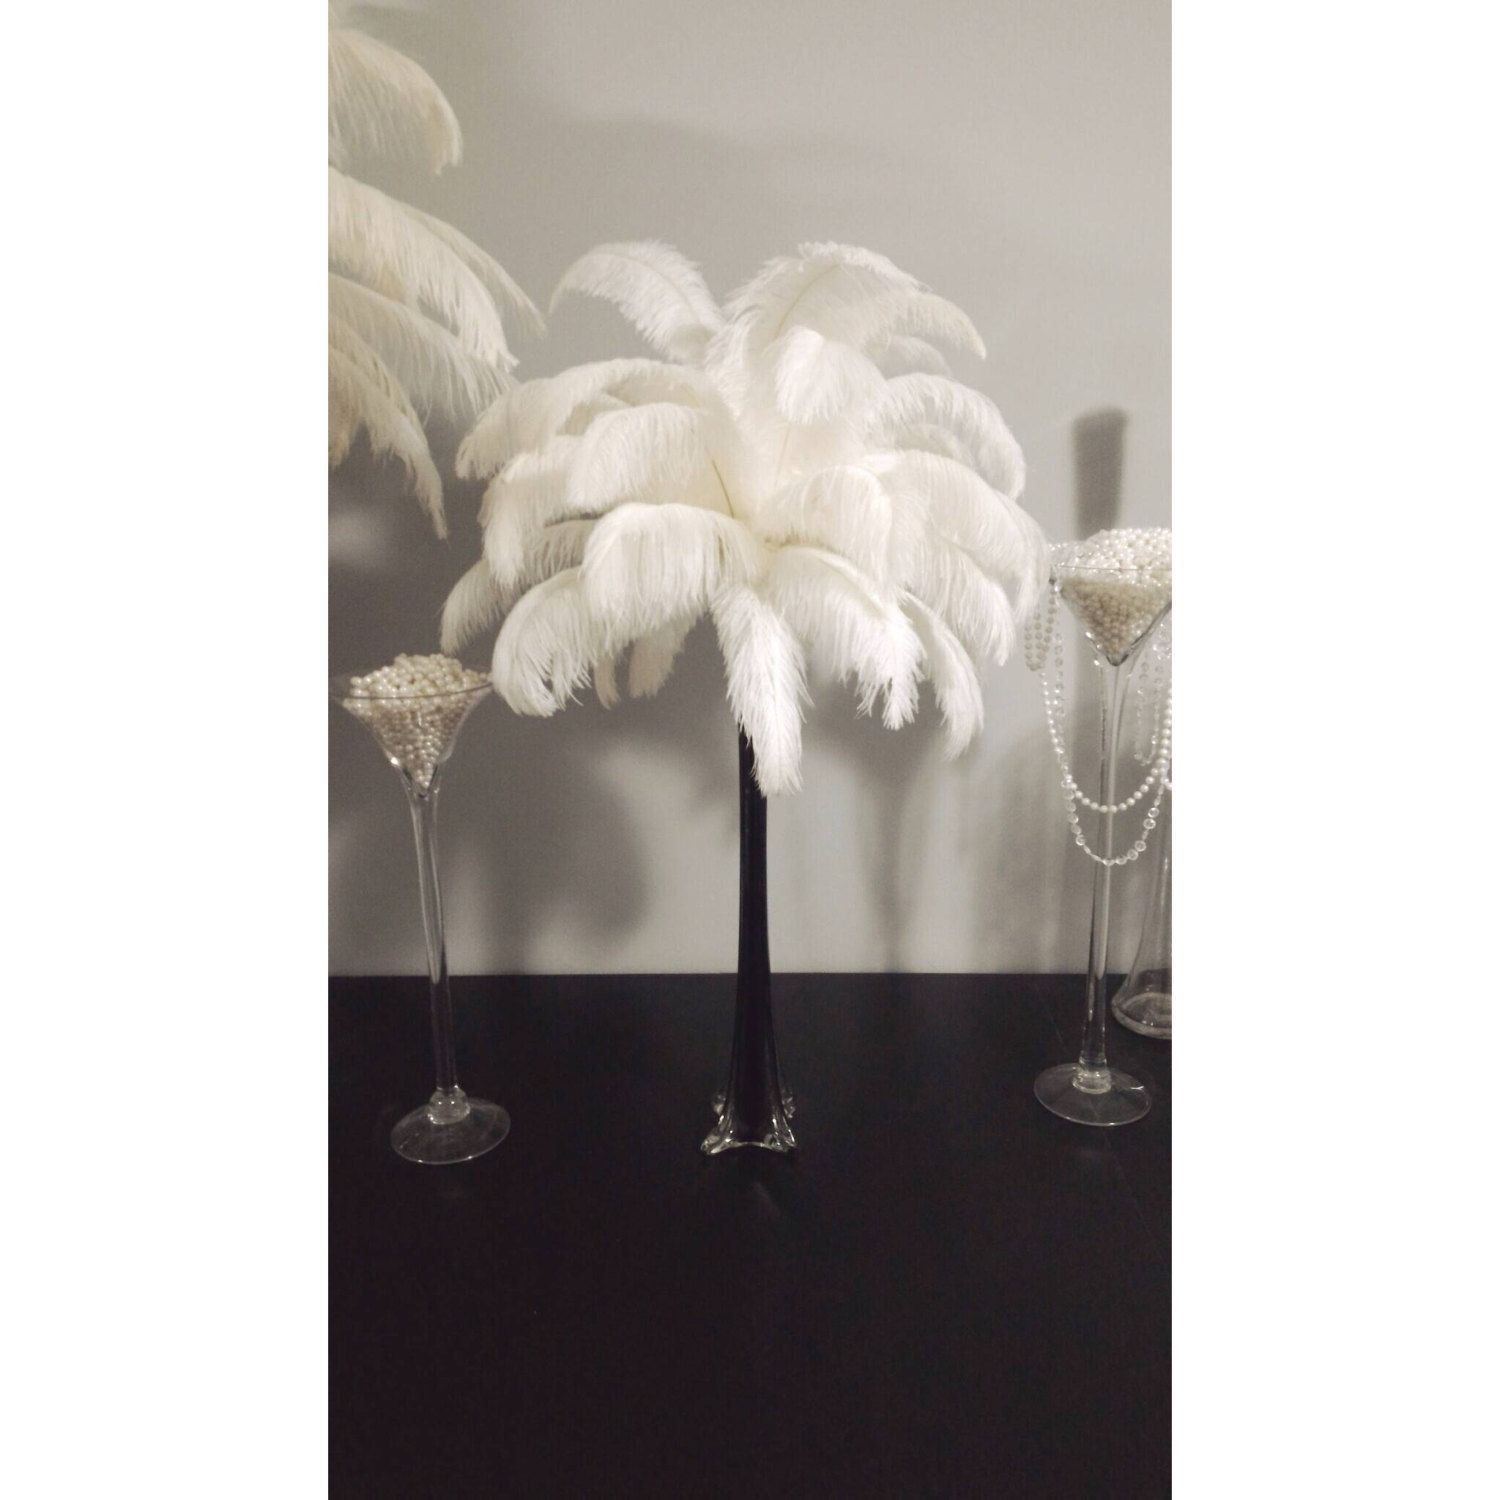 clear glass eiffel tower vase of 39 eiffel tower vases 24 inch the weekly world intended for black eiffel tower vase ostrich feather centerpiece black and